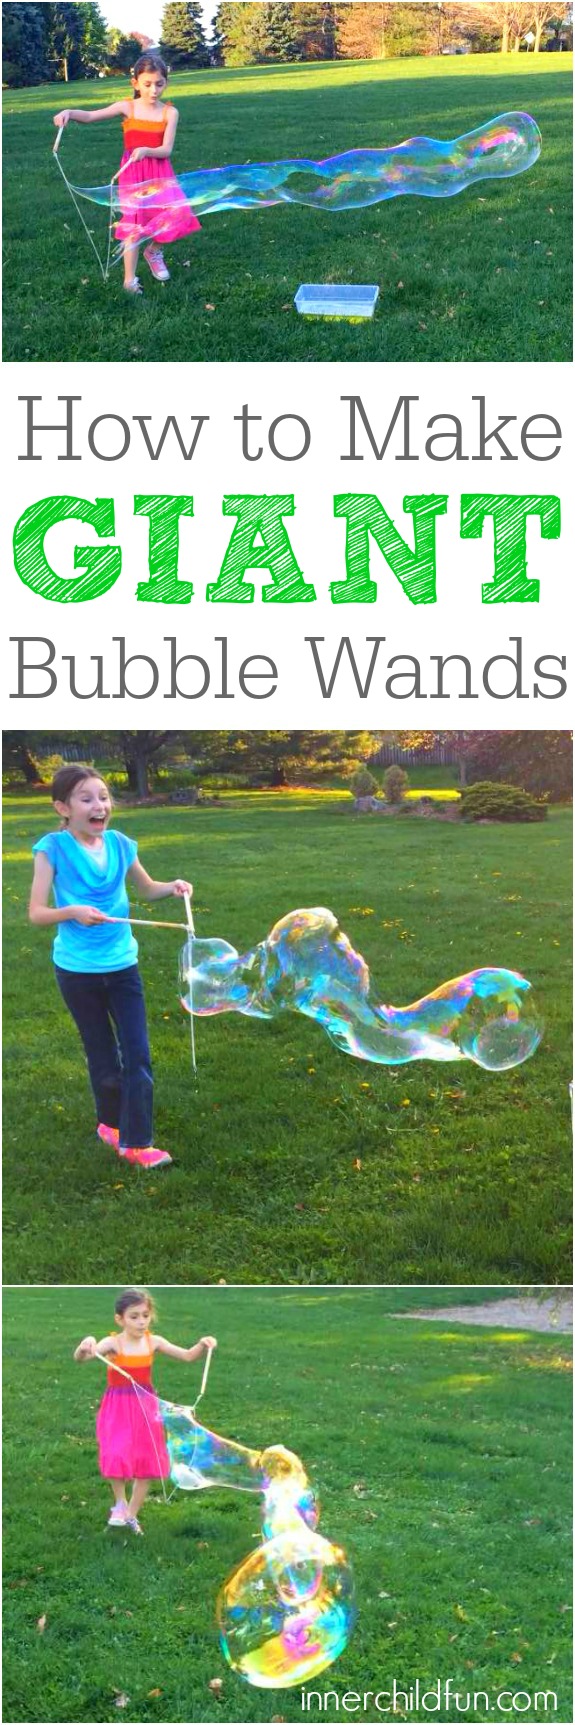 How to Make Giant Bubble Wands -- so cool!!